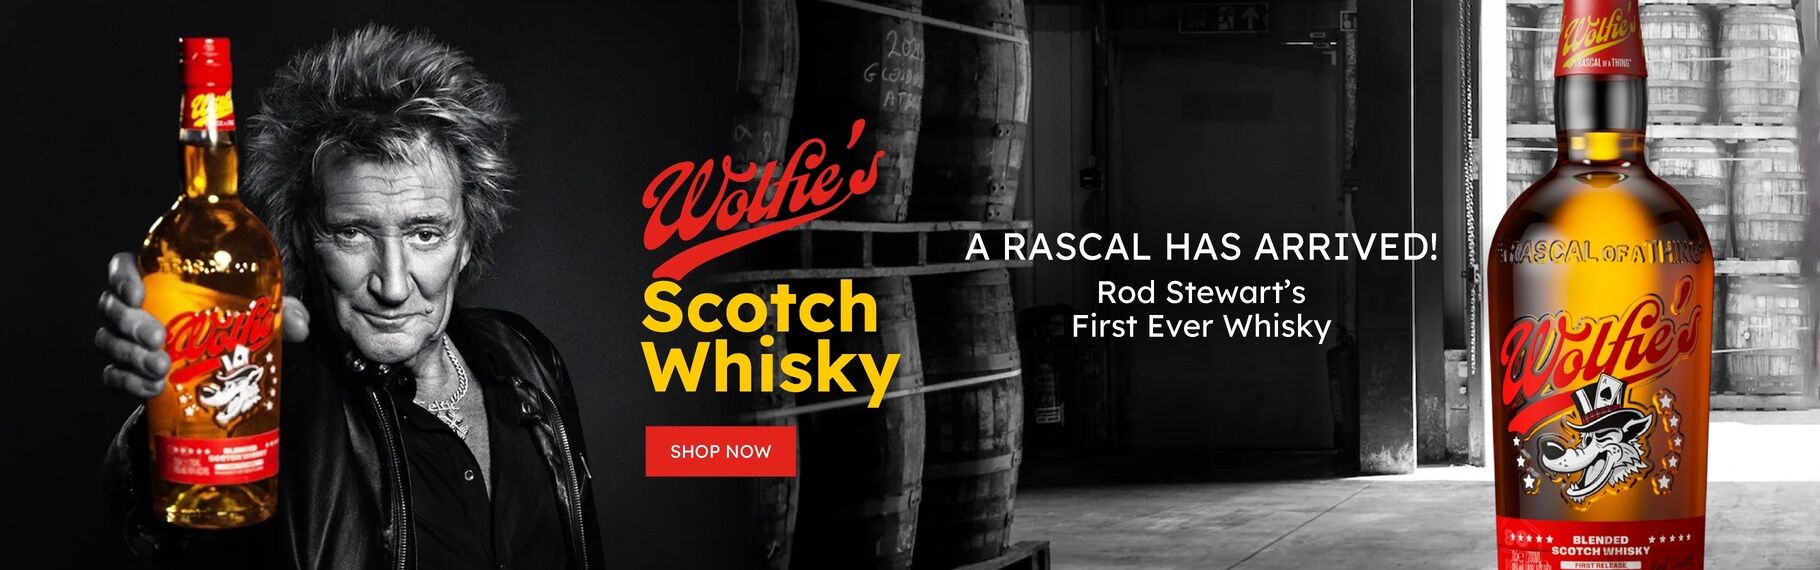 A Rascal Has Arrived! Wolfie’s Scotch Whisky - Rod Stewart’s First Ever Whisky